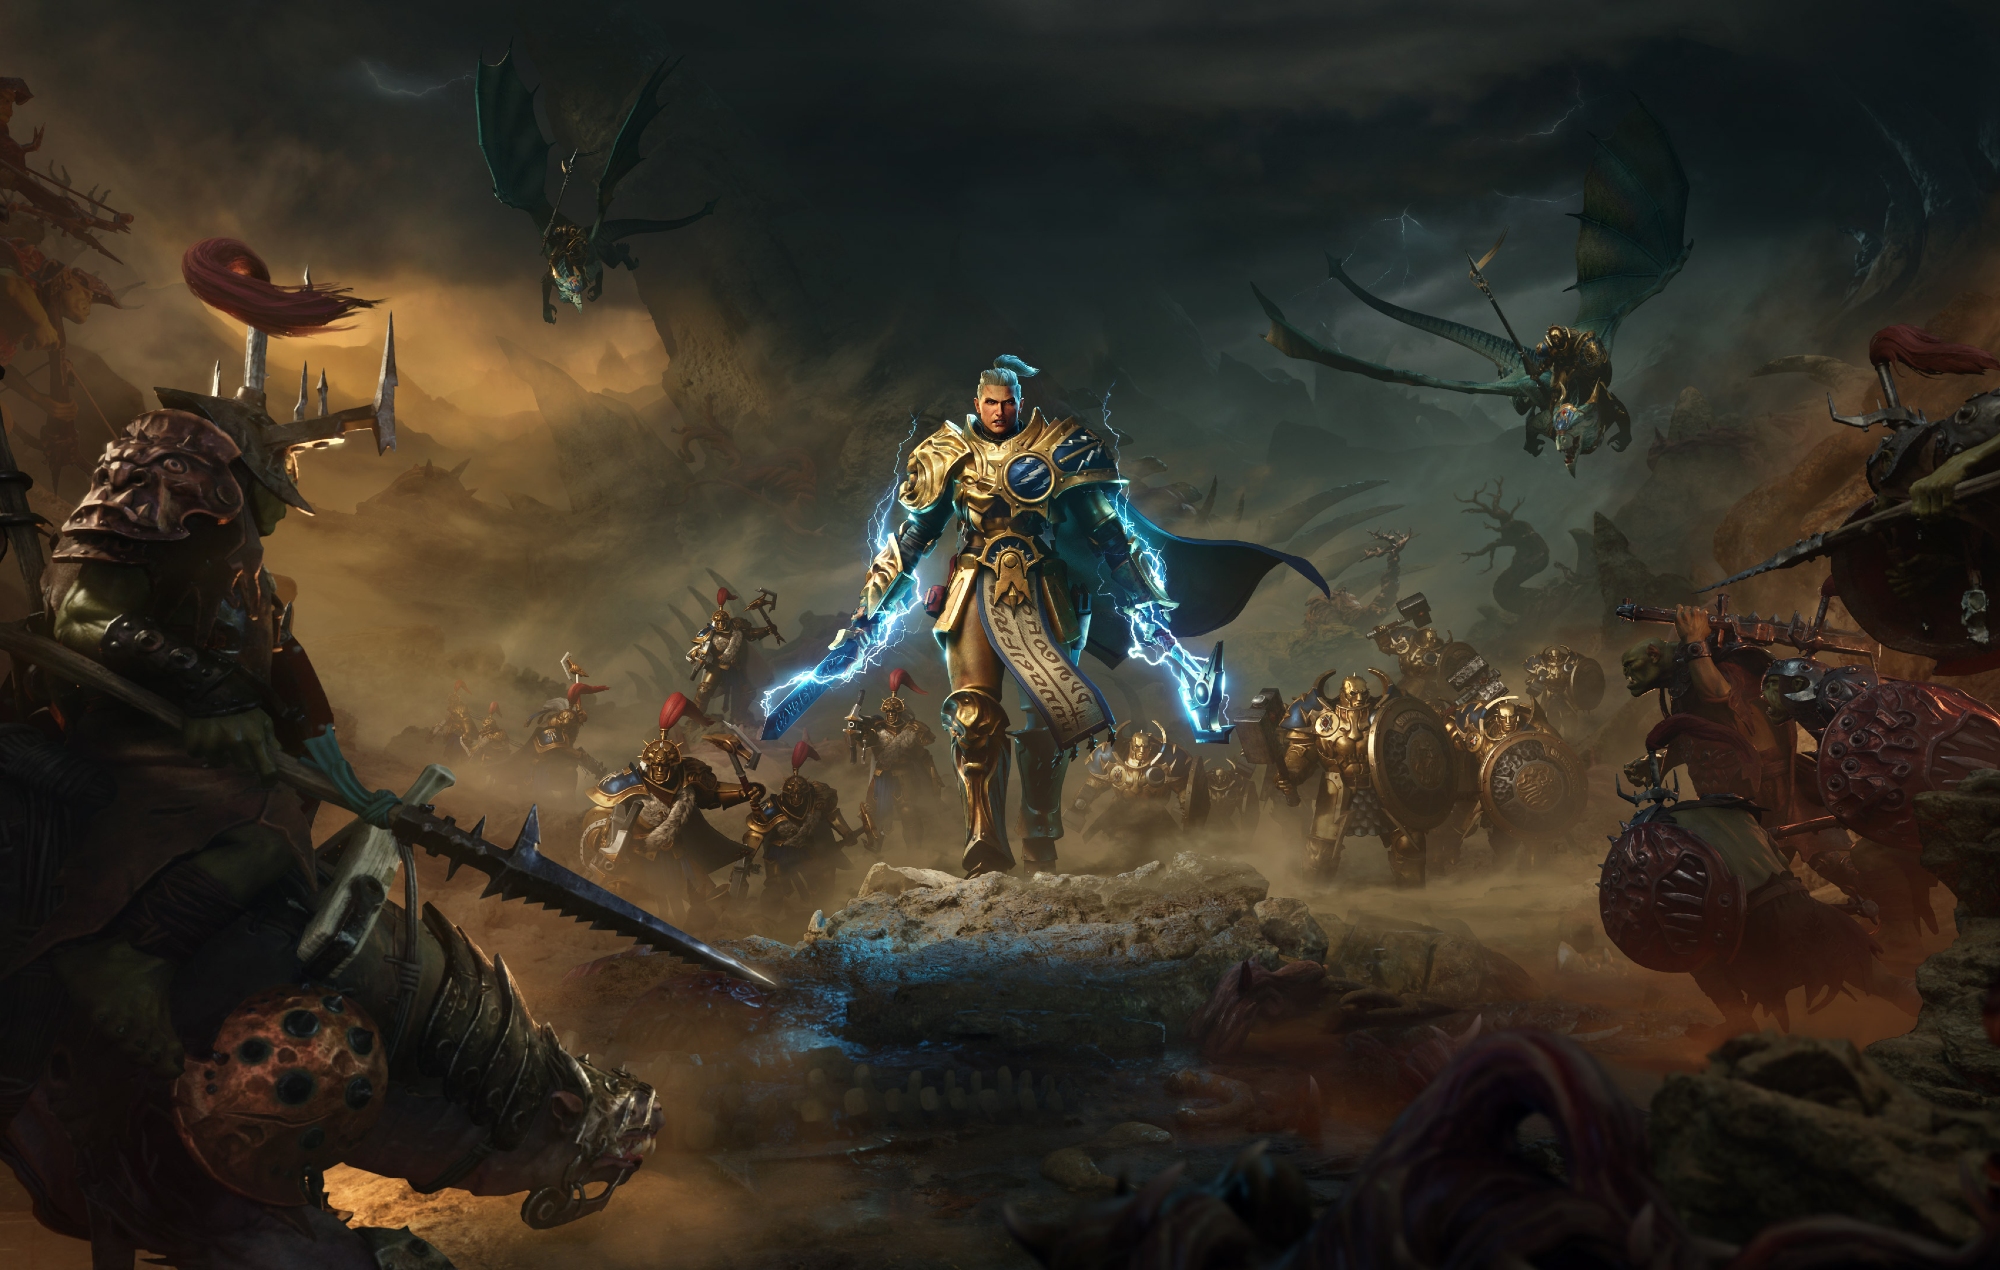 Warhammer Age Of Sigmar: Realms Of Ruin. Credit: Frontier Developments.